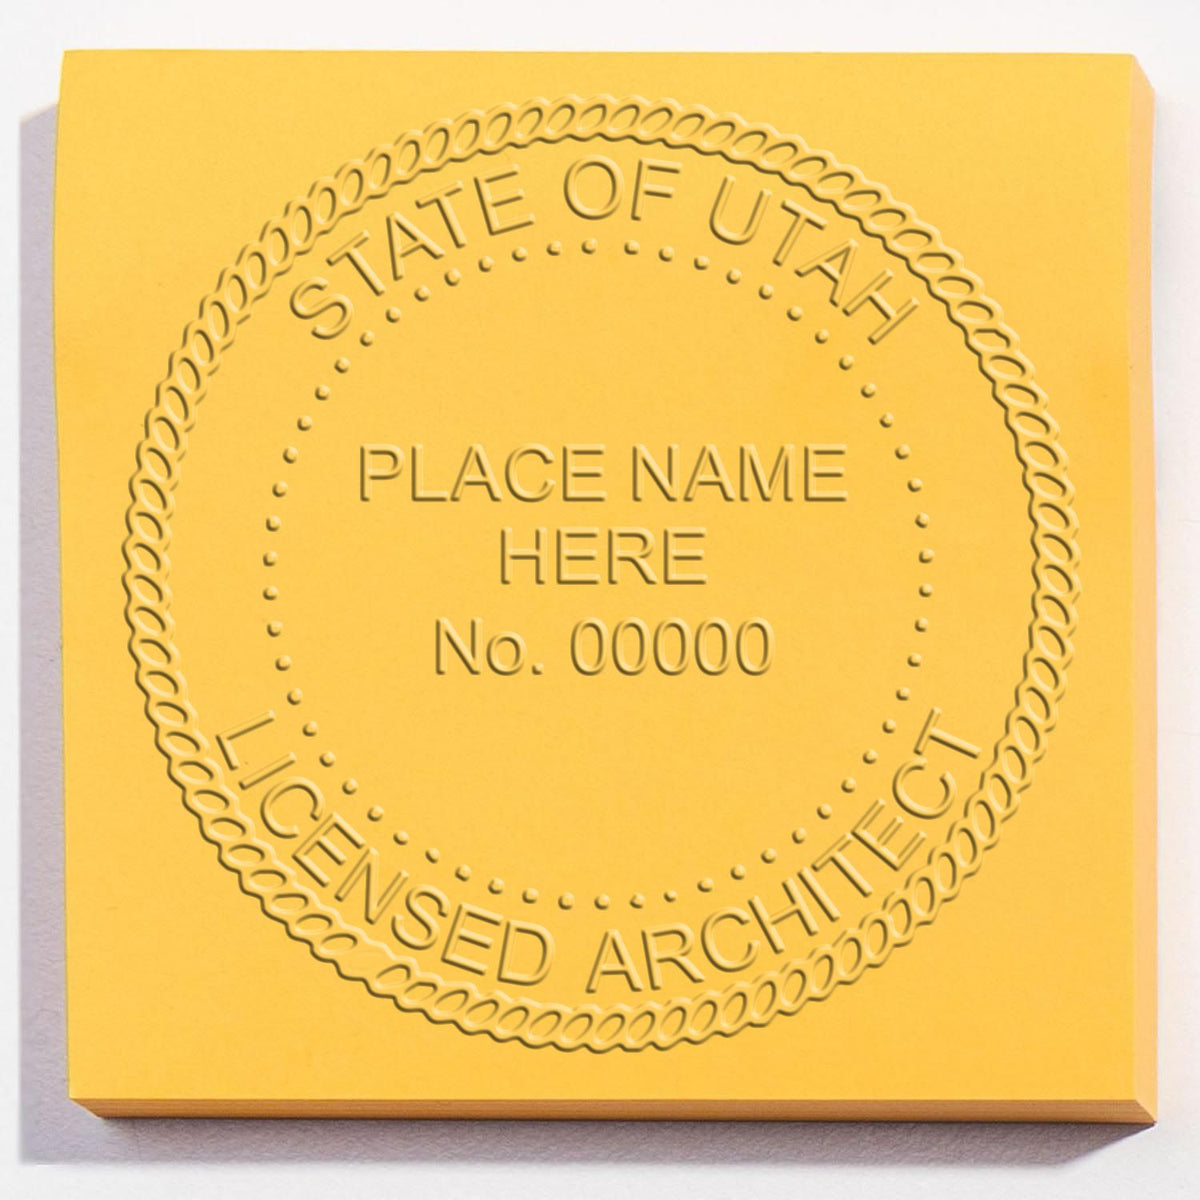 A lifestyle photo showing a stamped image of the Utah Desk Architect Embossing Seal on a piece of paper